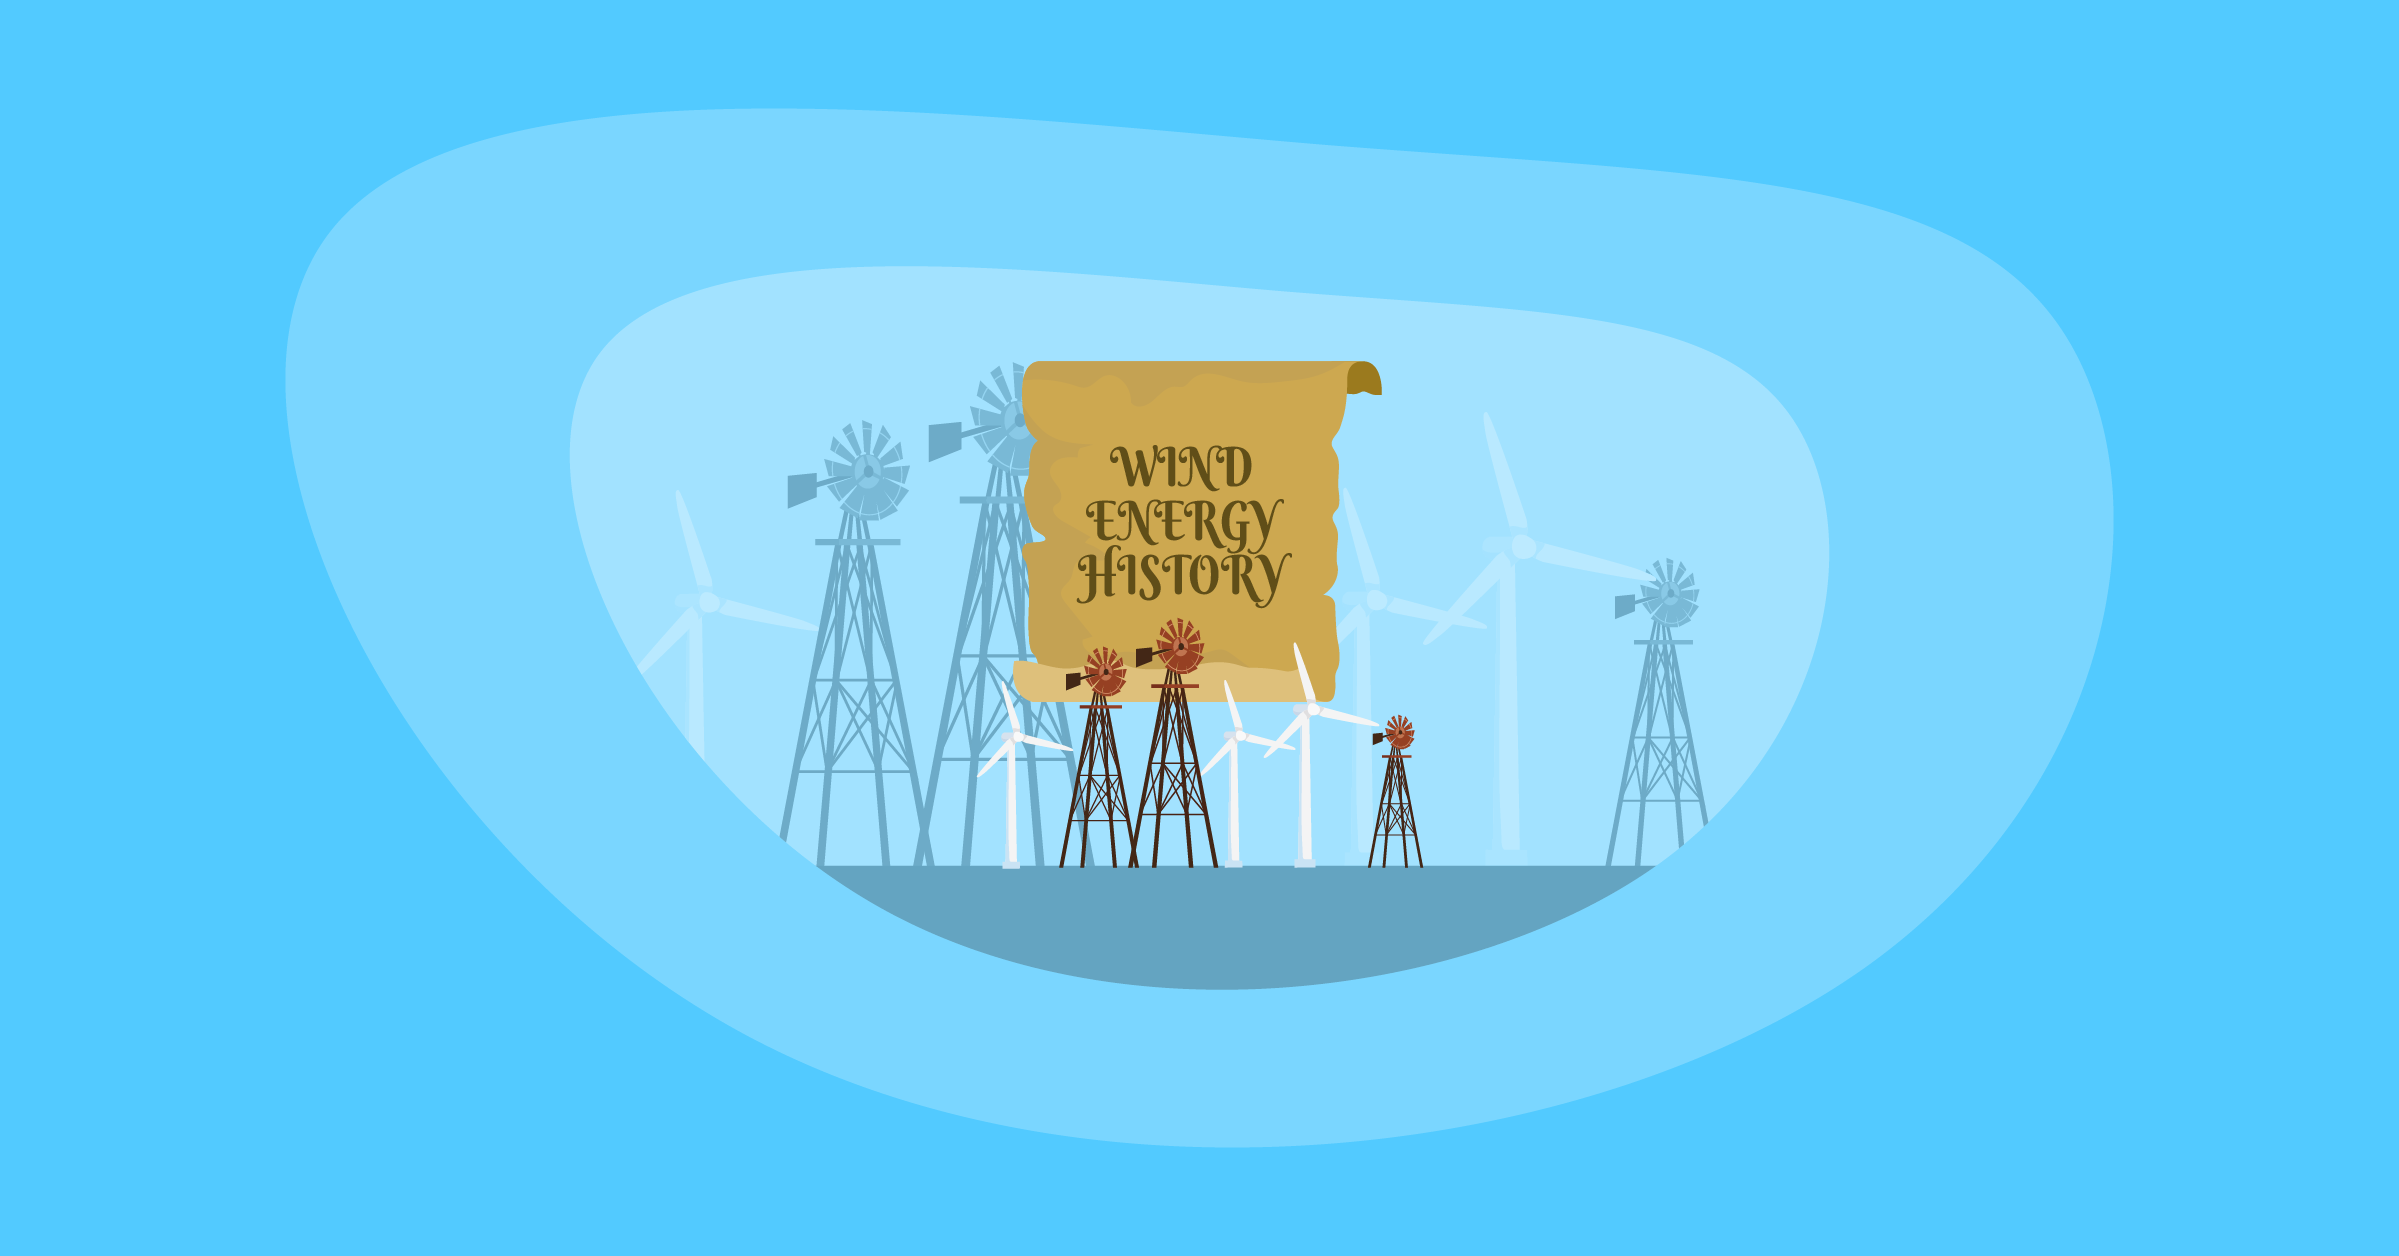 Illustration of the wind energy and its history